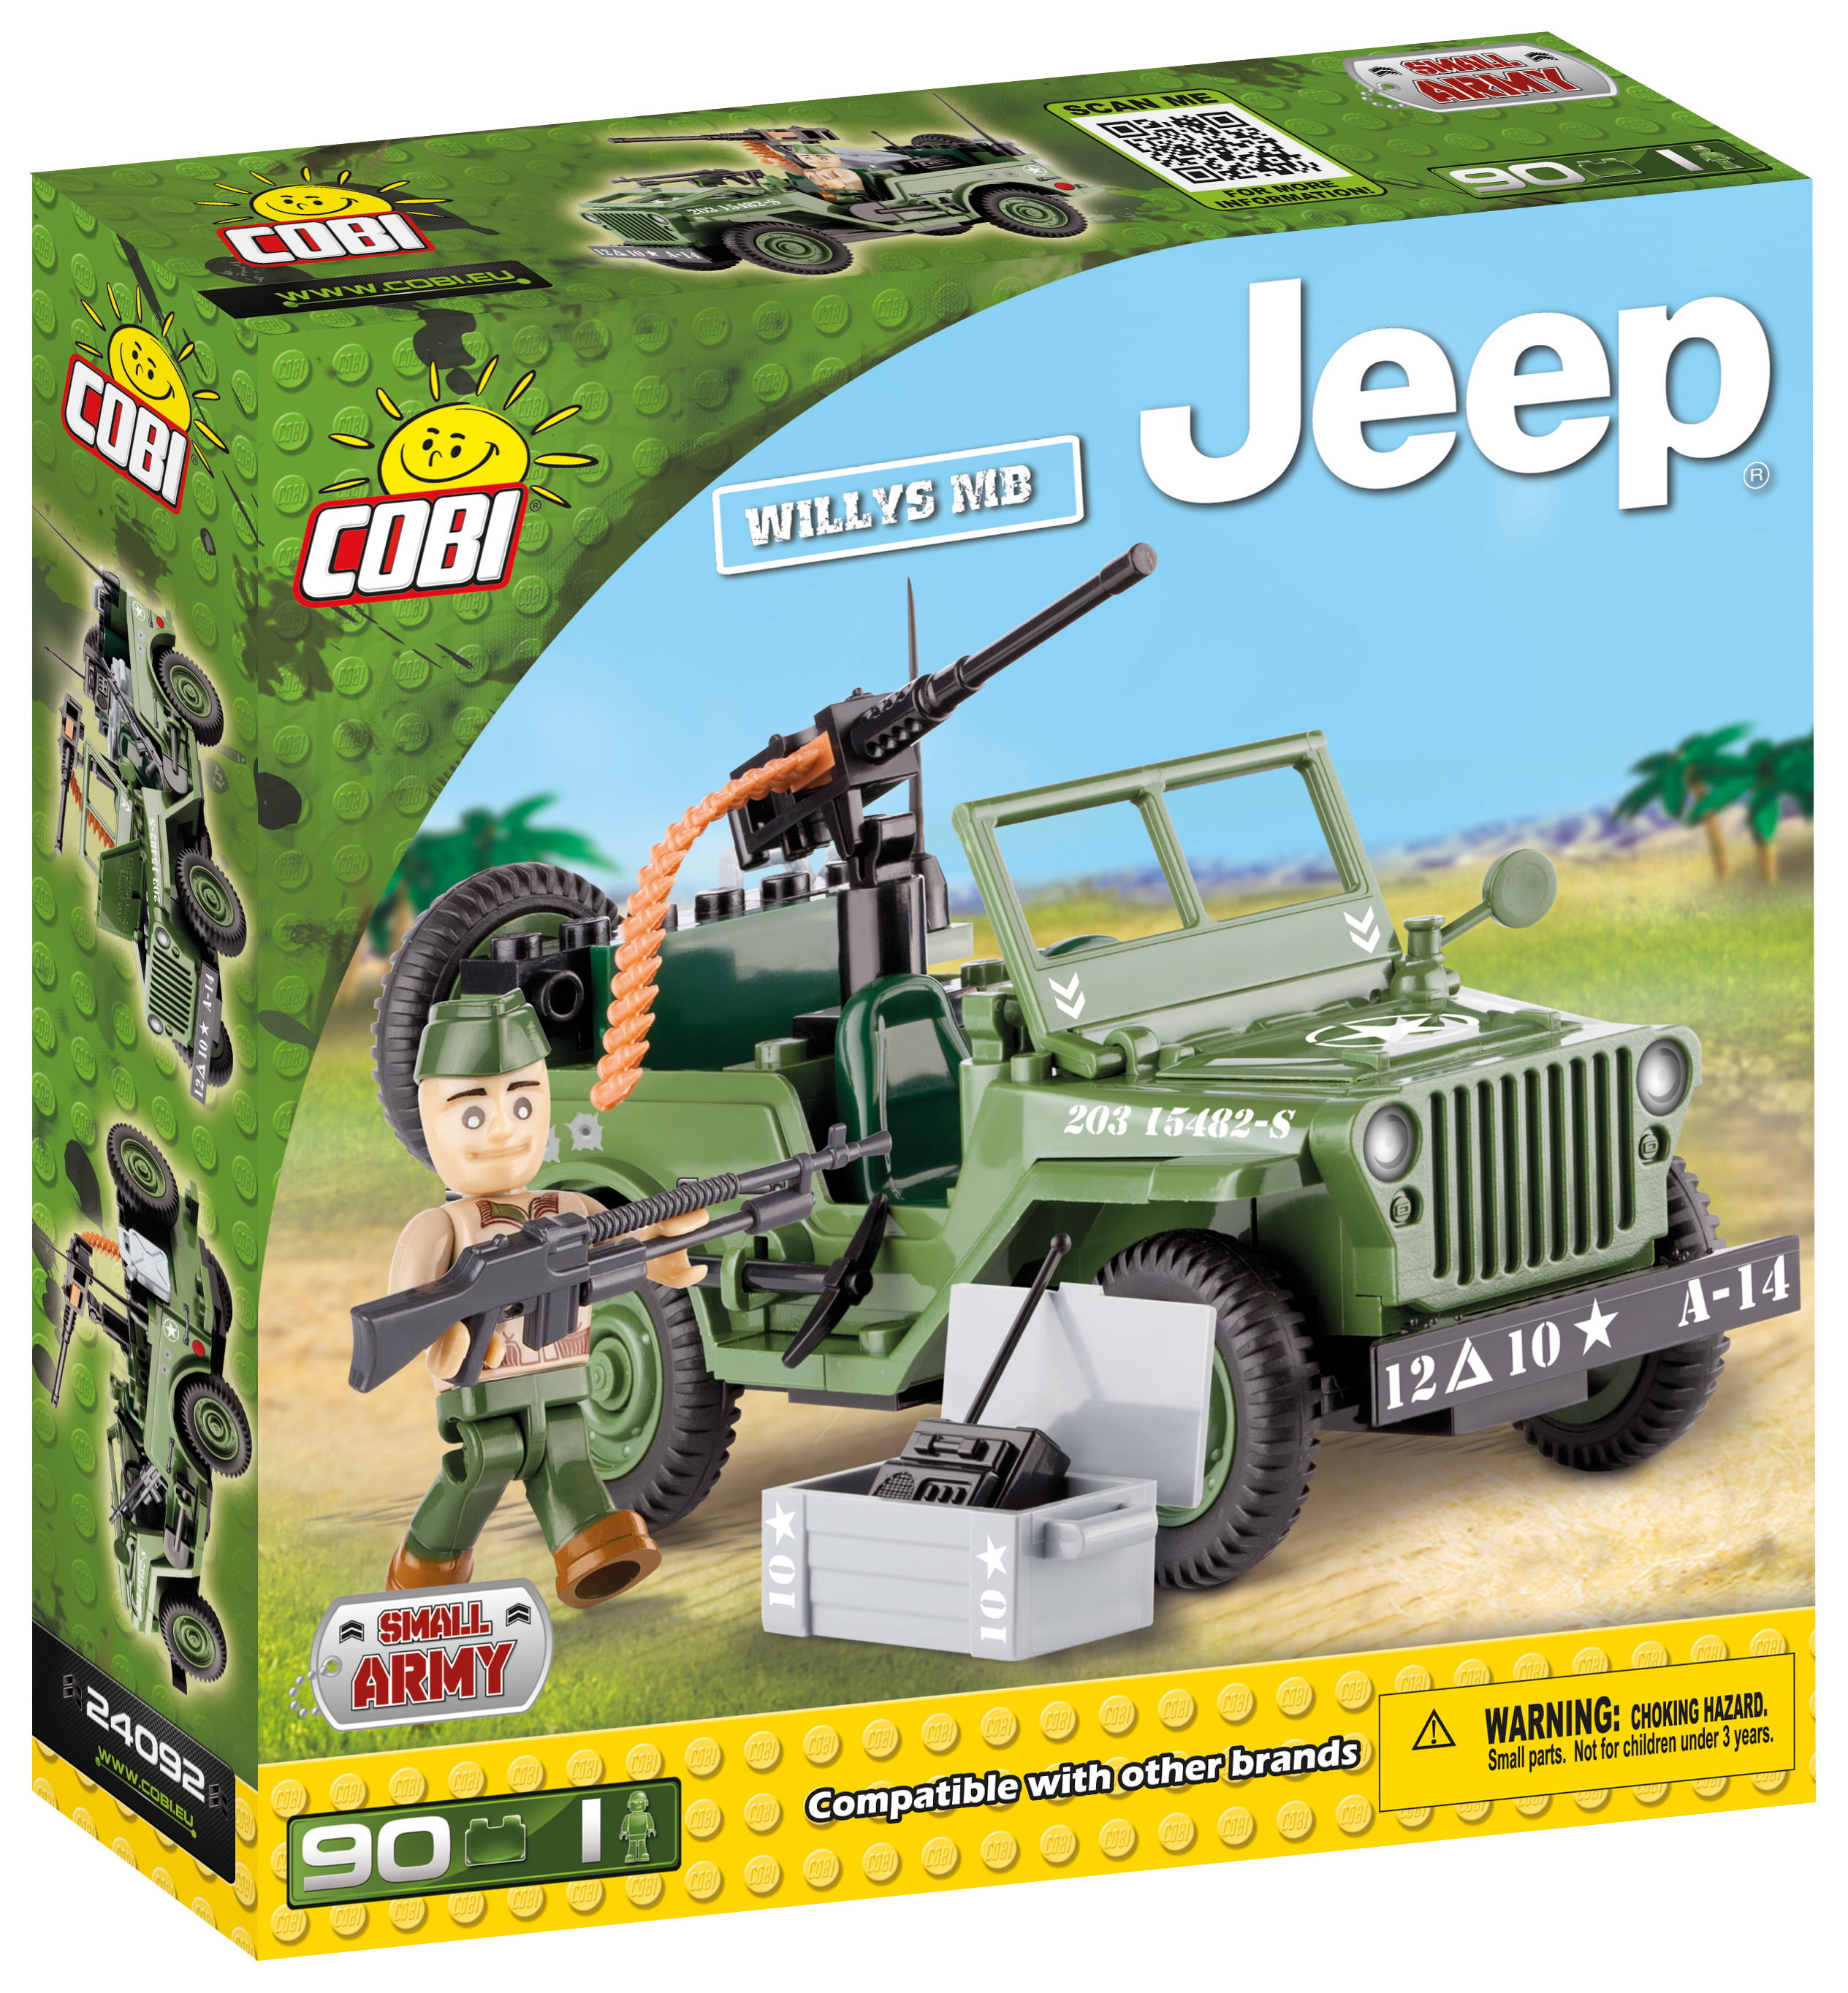 COBI Small Army Vehicle ~ Willys MB Jeep & Cannon 180 Piece Block Set #NEW 